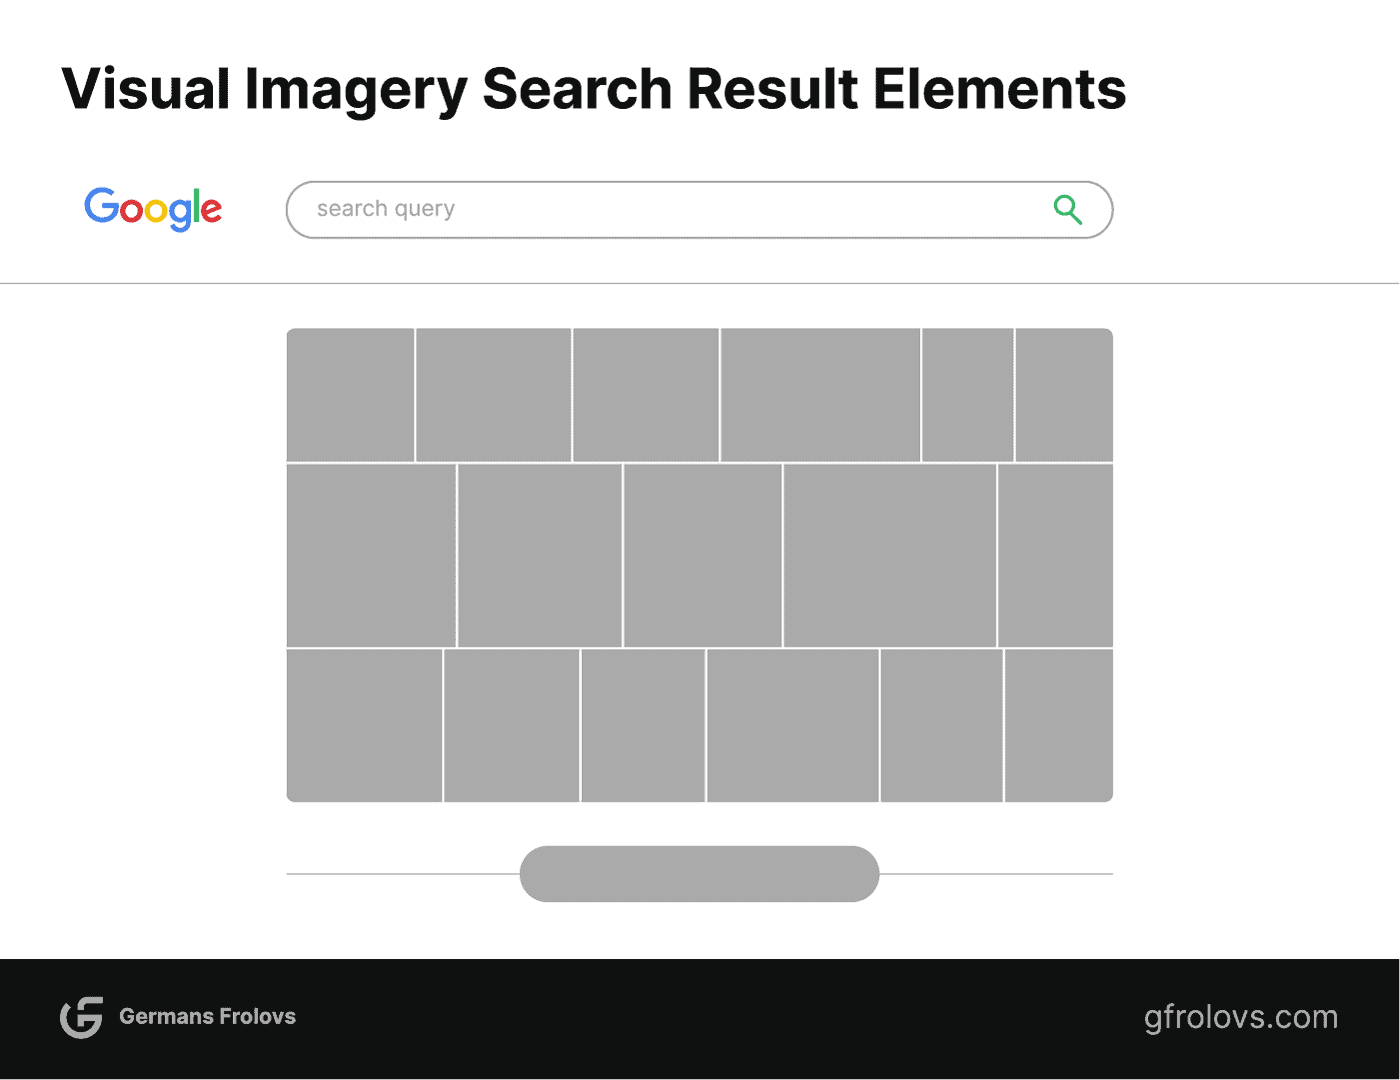 Visual imagery search result elements